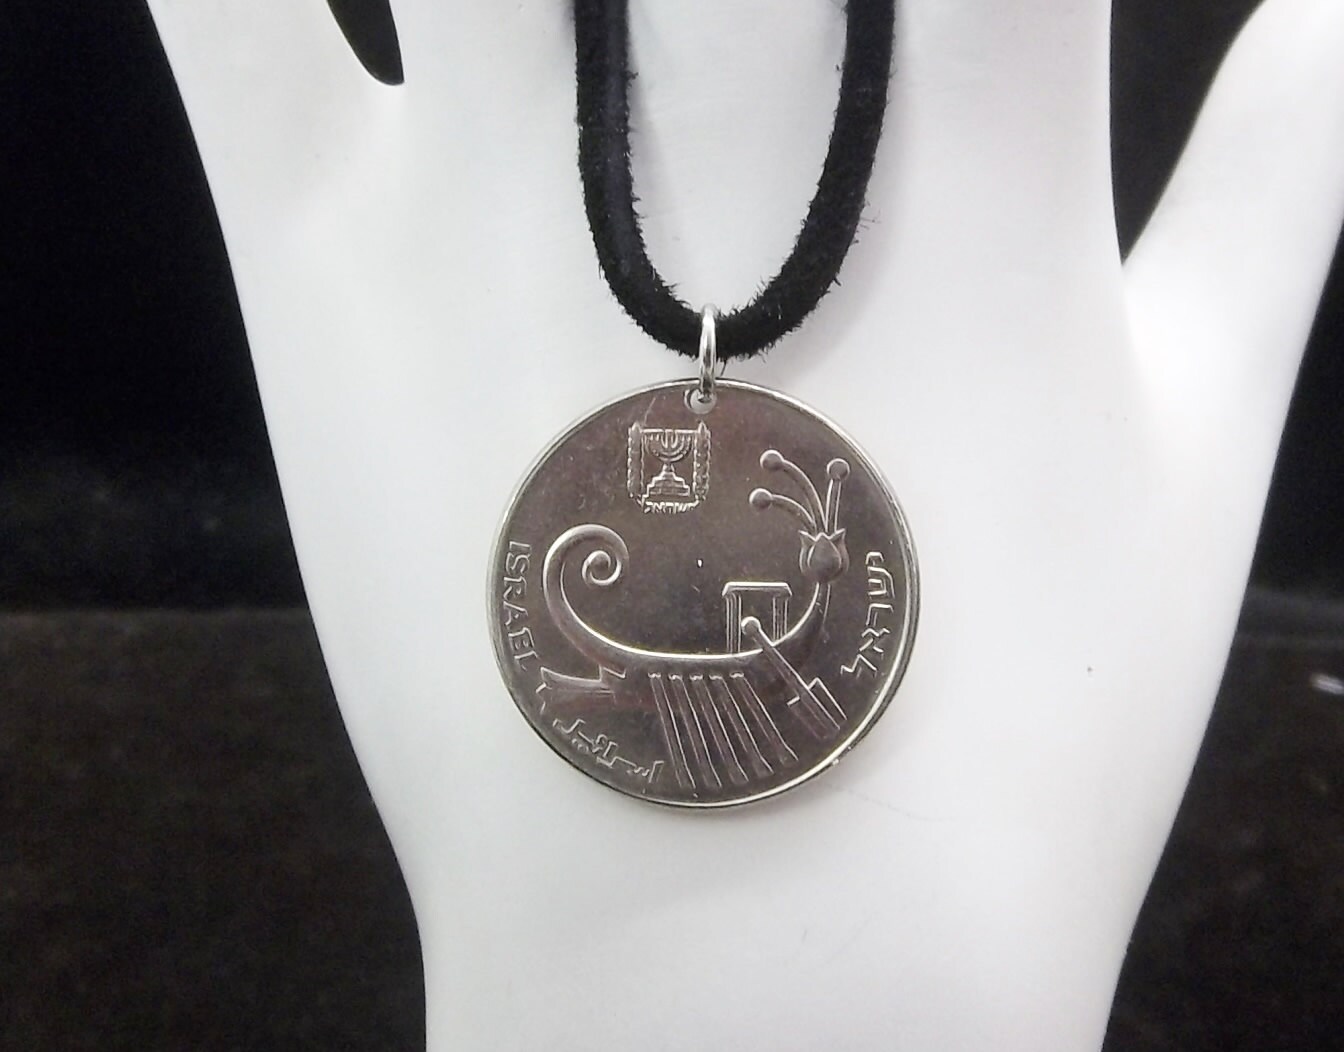 Israel Coin Necklace 10 Sheqalim Coin by AutumnWindsJewelry